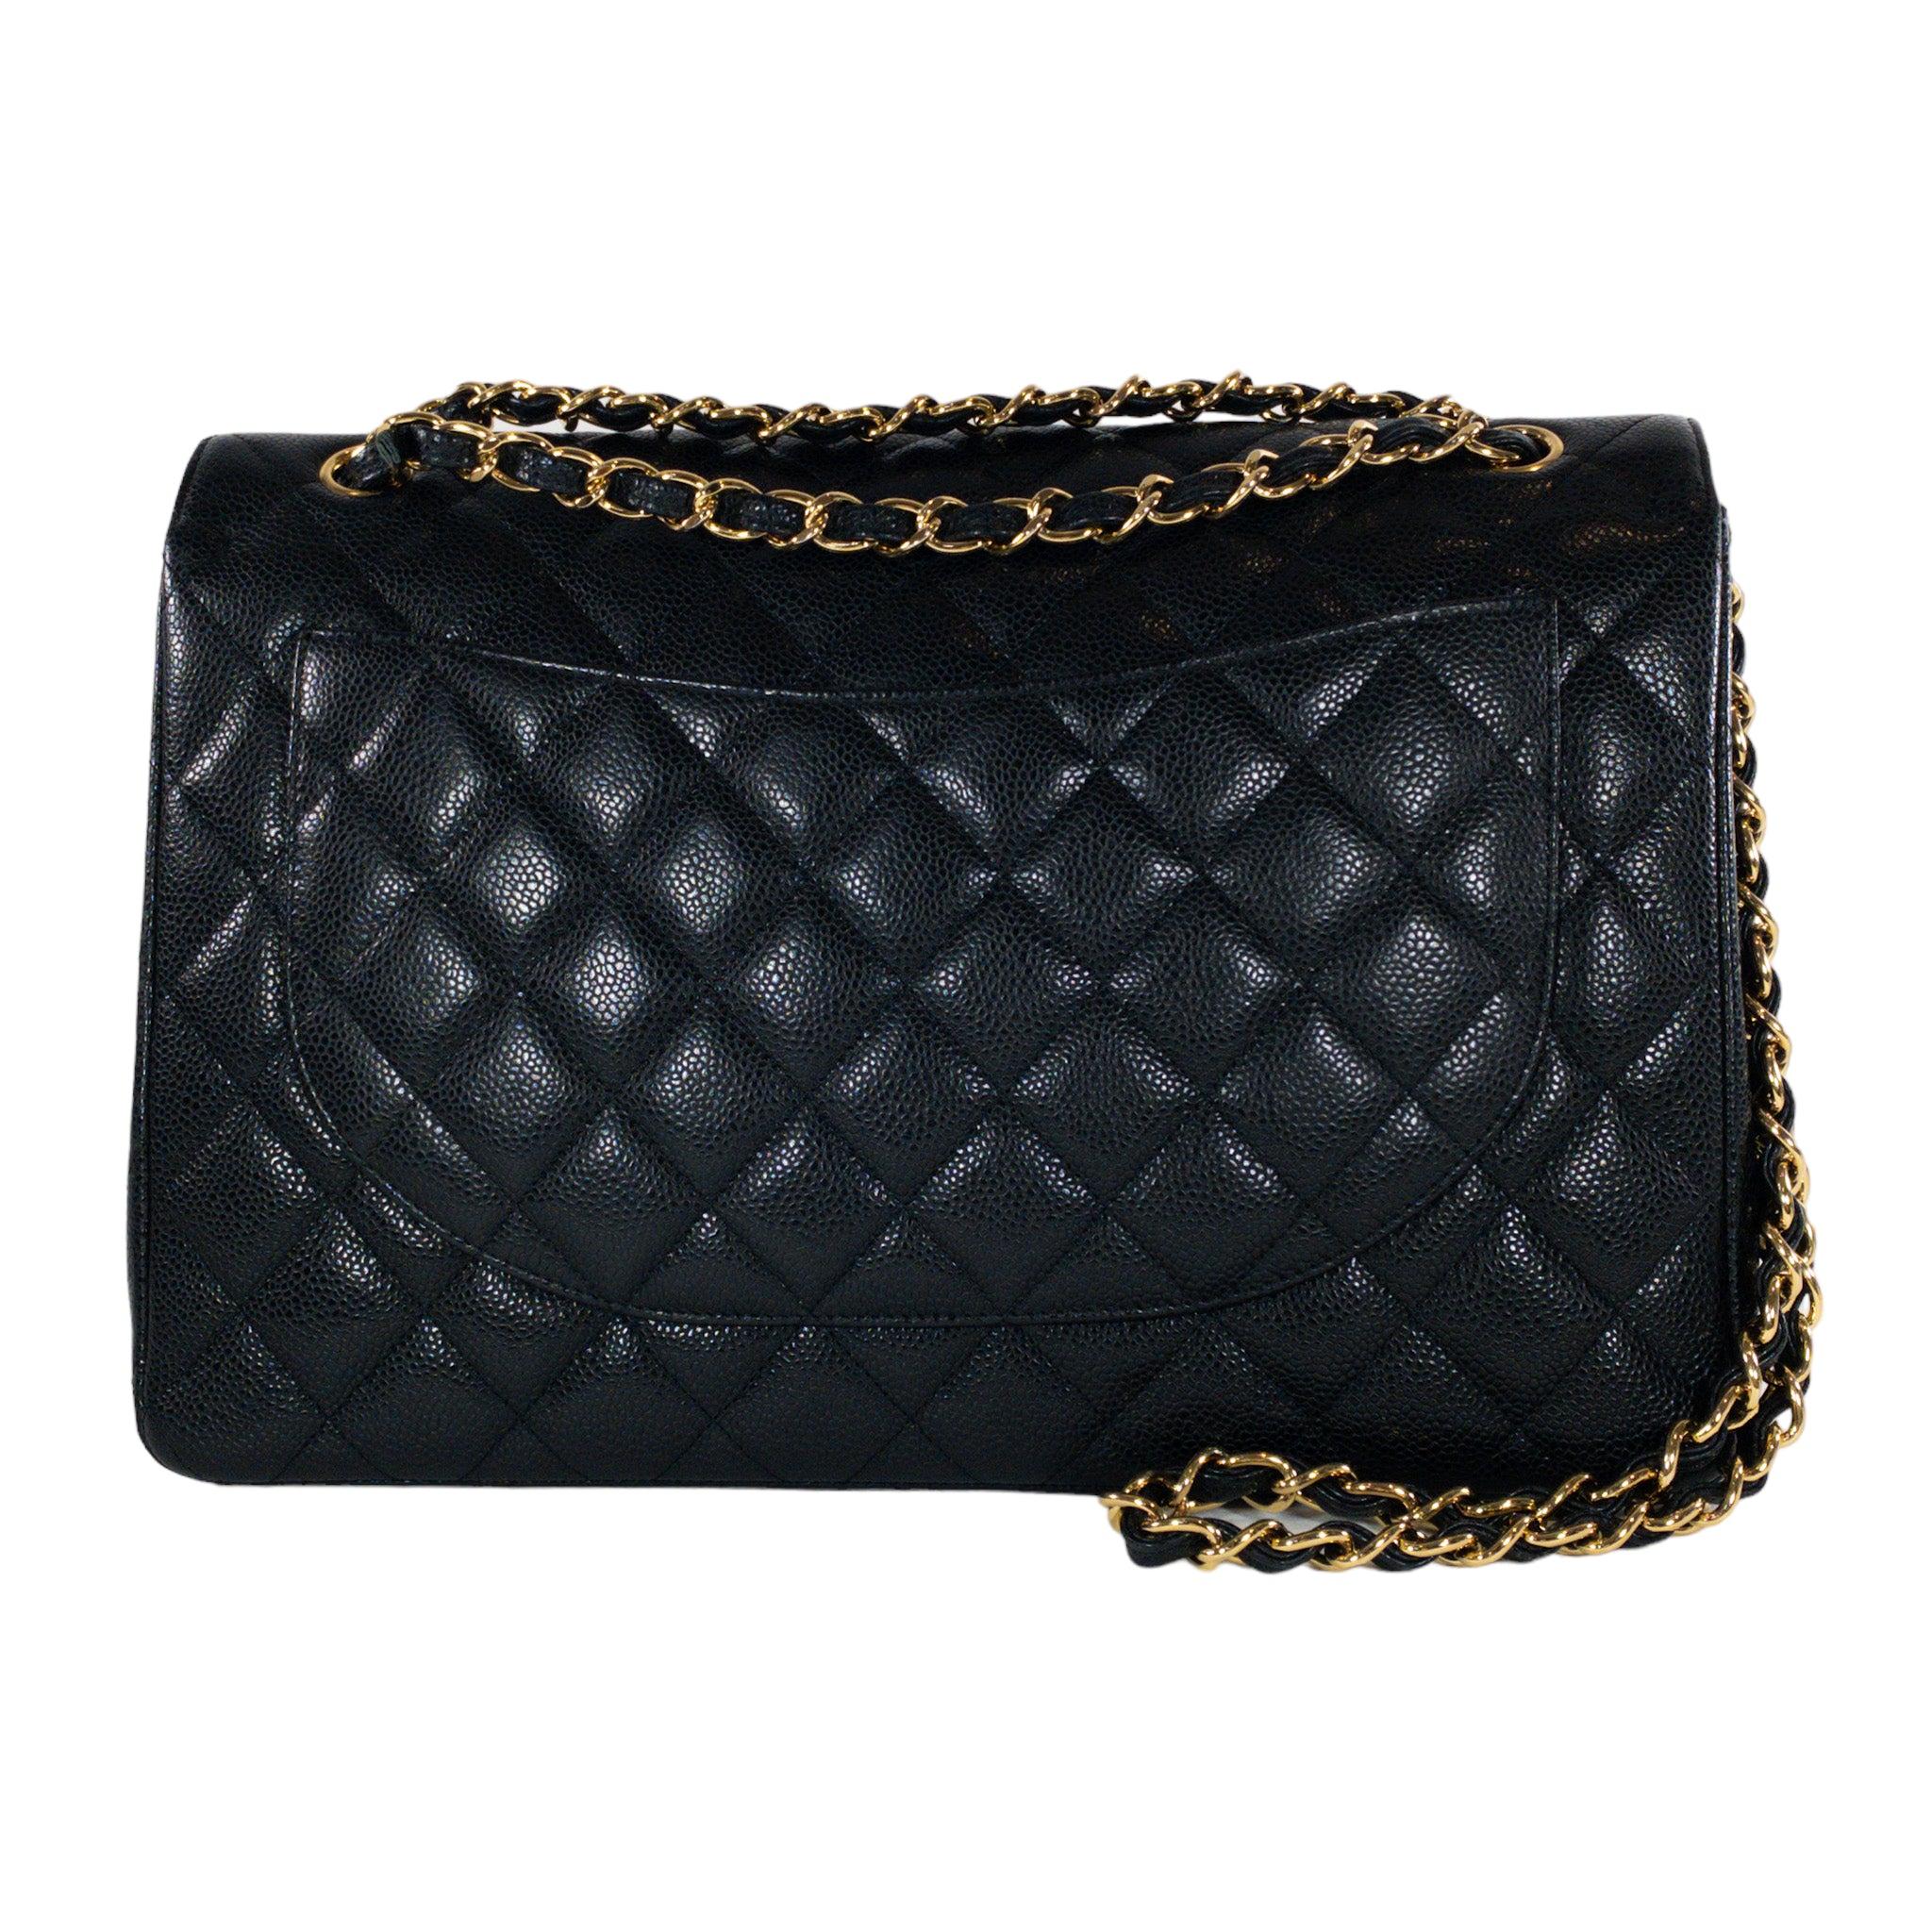 Chanel Black Caviar Maxi GHW Bag

This is an Authentic Chanel classic double flap in size Maxi. Black Caviar leather with gold hardware. Classic CC turn lock on front flap. Chain strap that can be worn singled or doubled, on the shoulder or